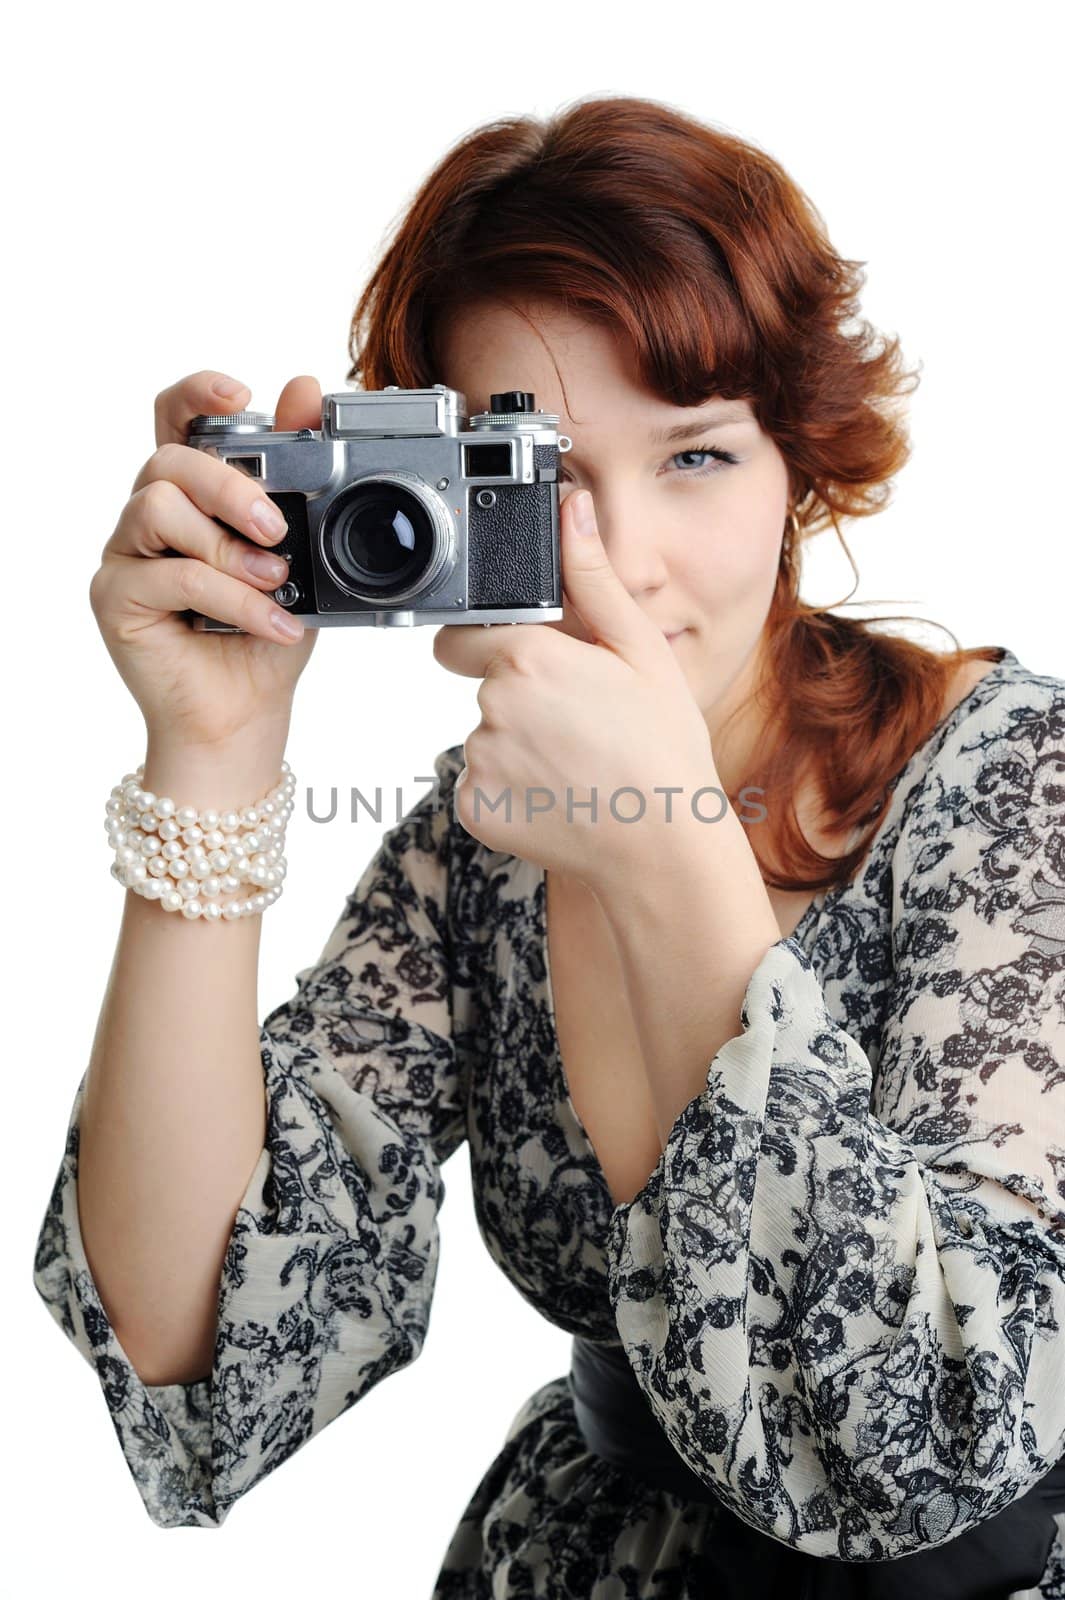 An image of a woman with a camera in her hands